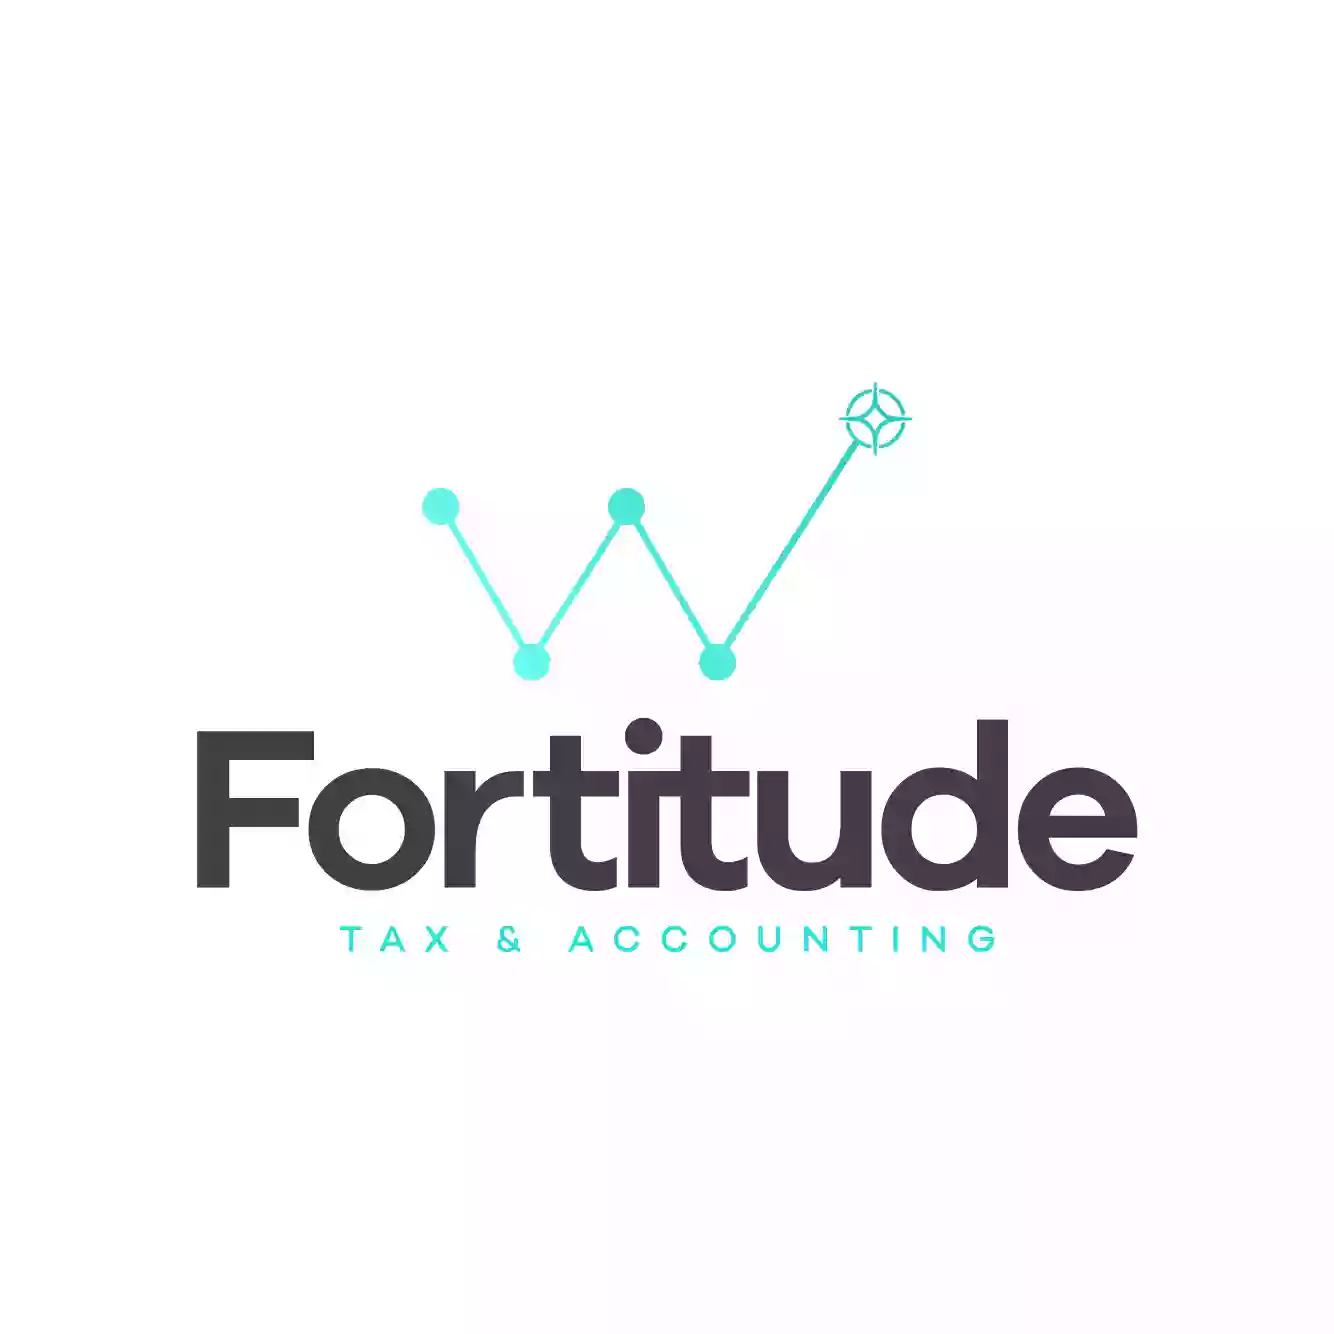 Fortitude Tax & Accounting